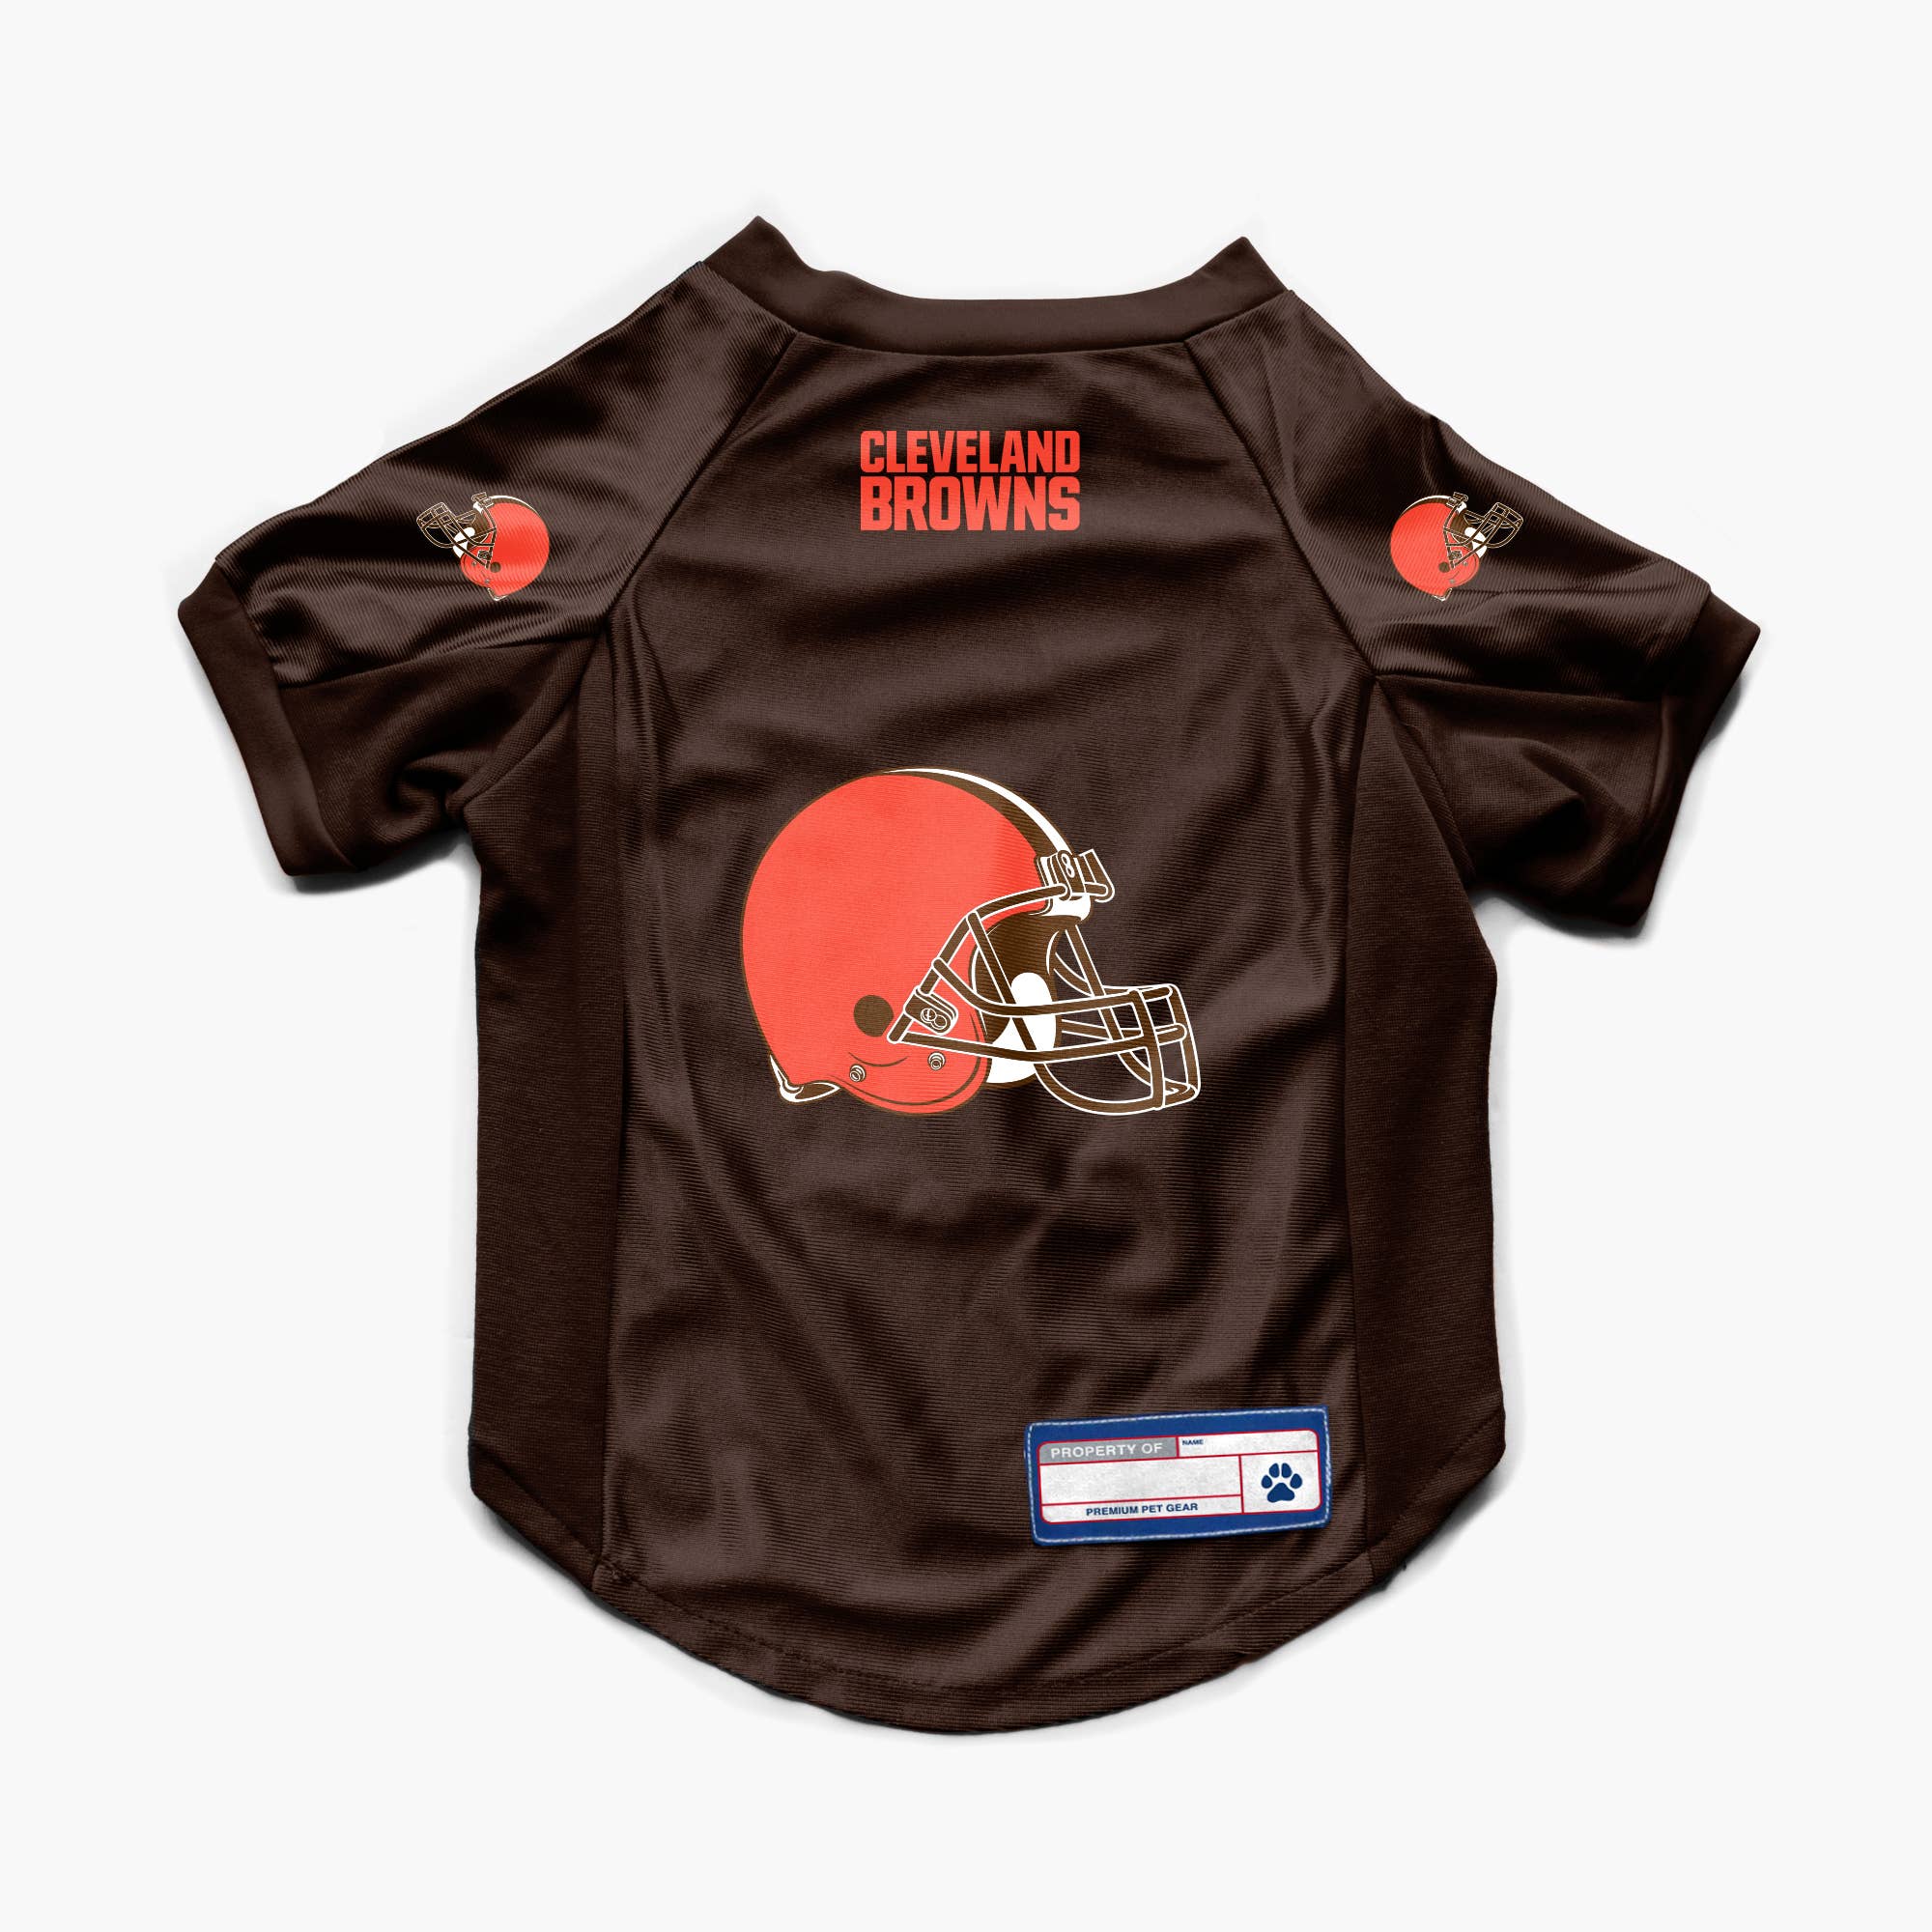 Cleveland Browns Pet Stretch Jersey - Large